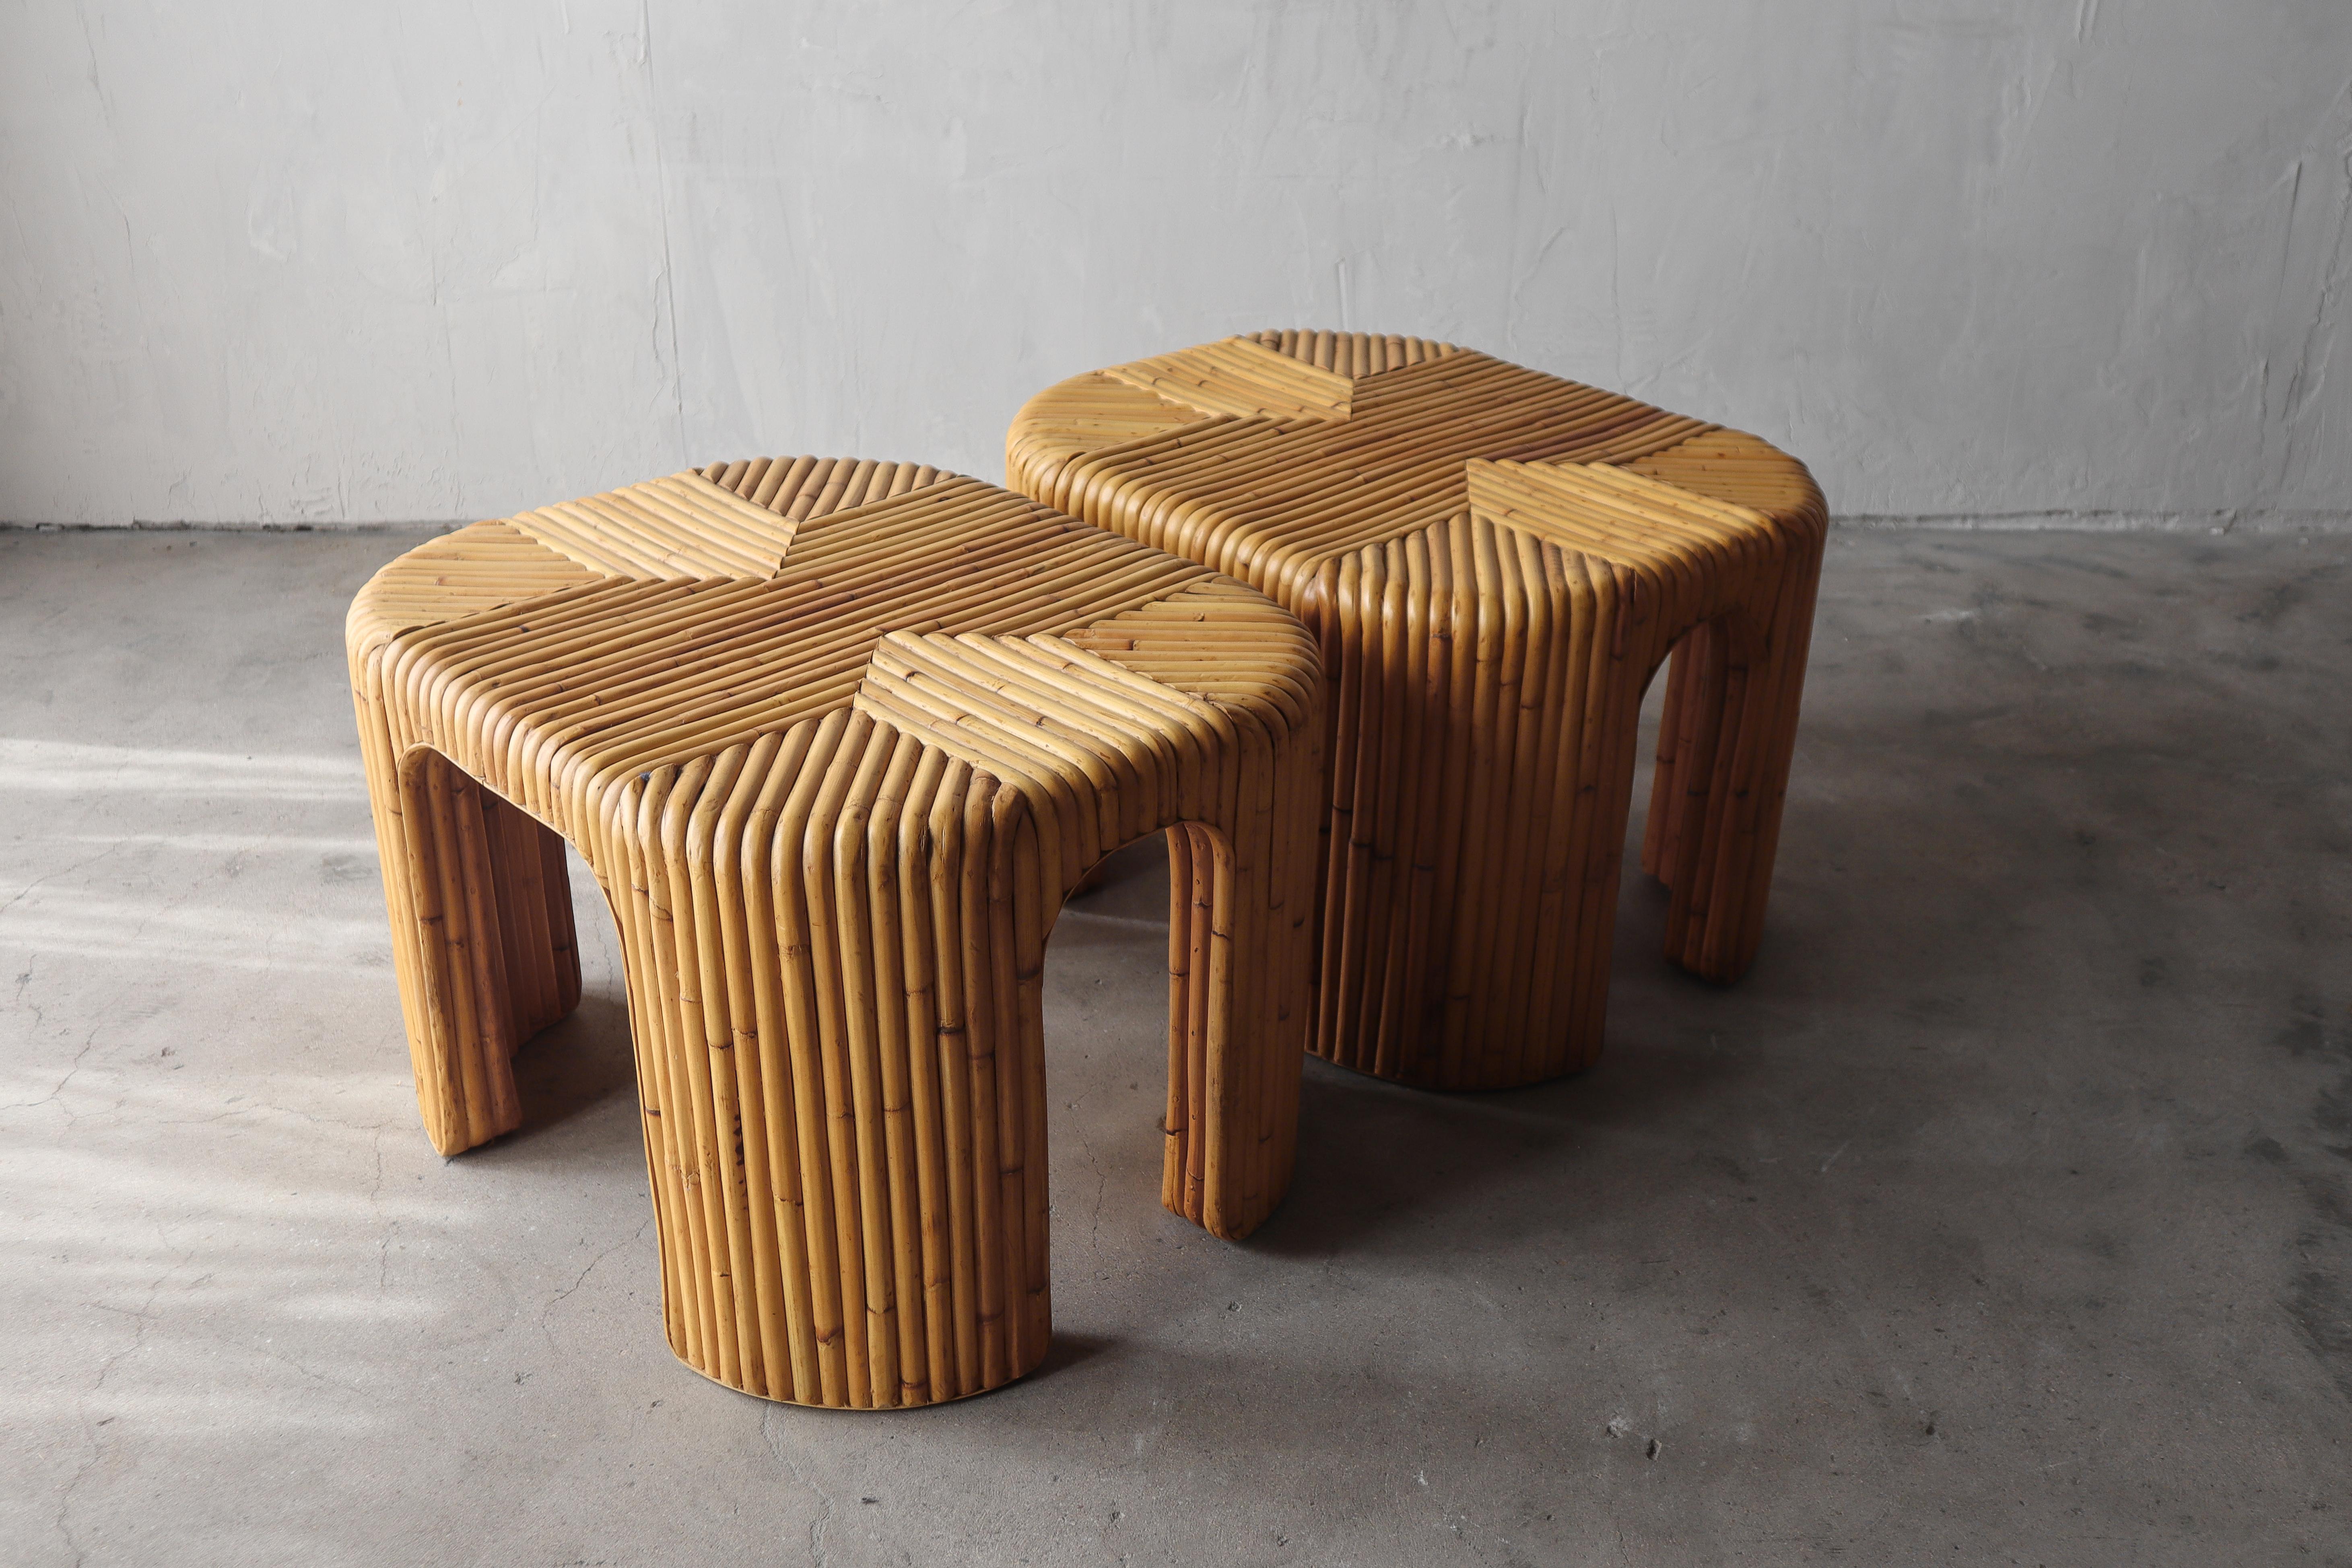 Incredible pair of vintage bamboo side tables. Bamboo is laid in an intricately decorative pattern and the legs create arches, creating true visual interest. Tables are quite substantial. They are large enough to be used together as a coffee